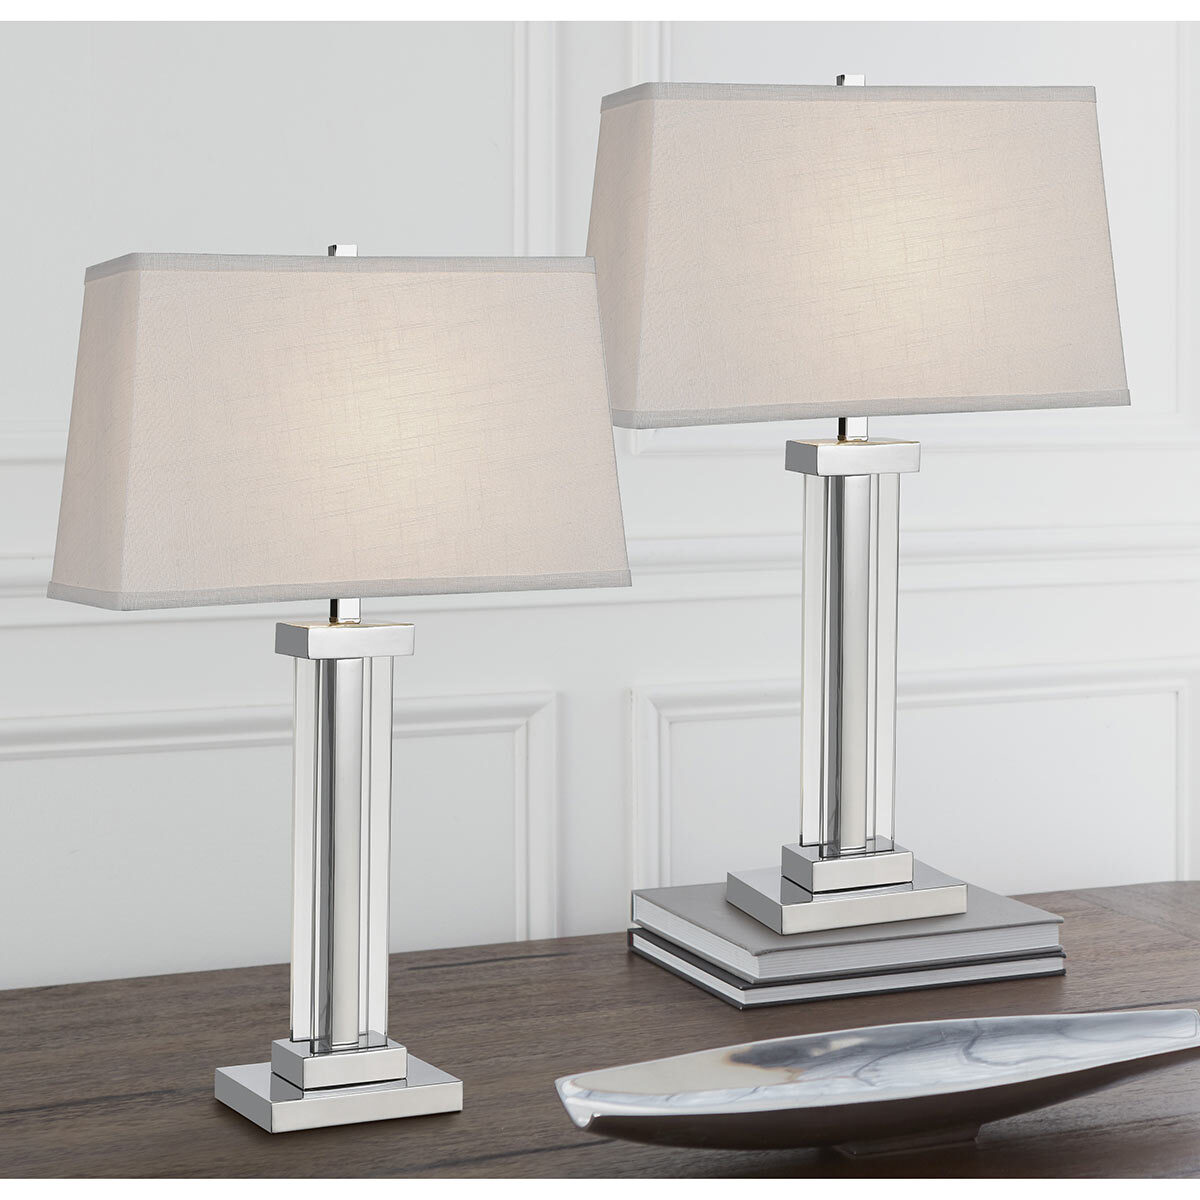 Kate Crystal Table Lamps 2 Pack, Unique Table Lamps Uk